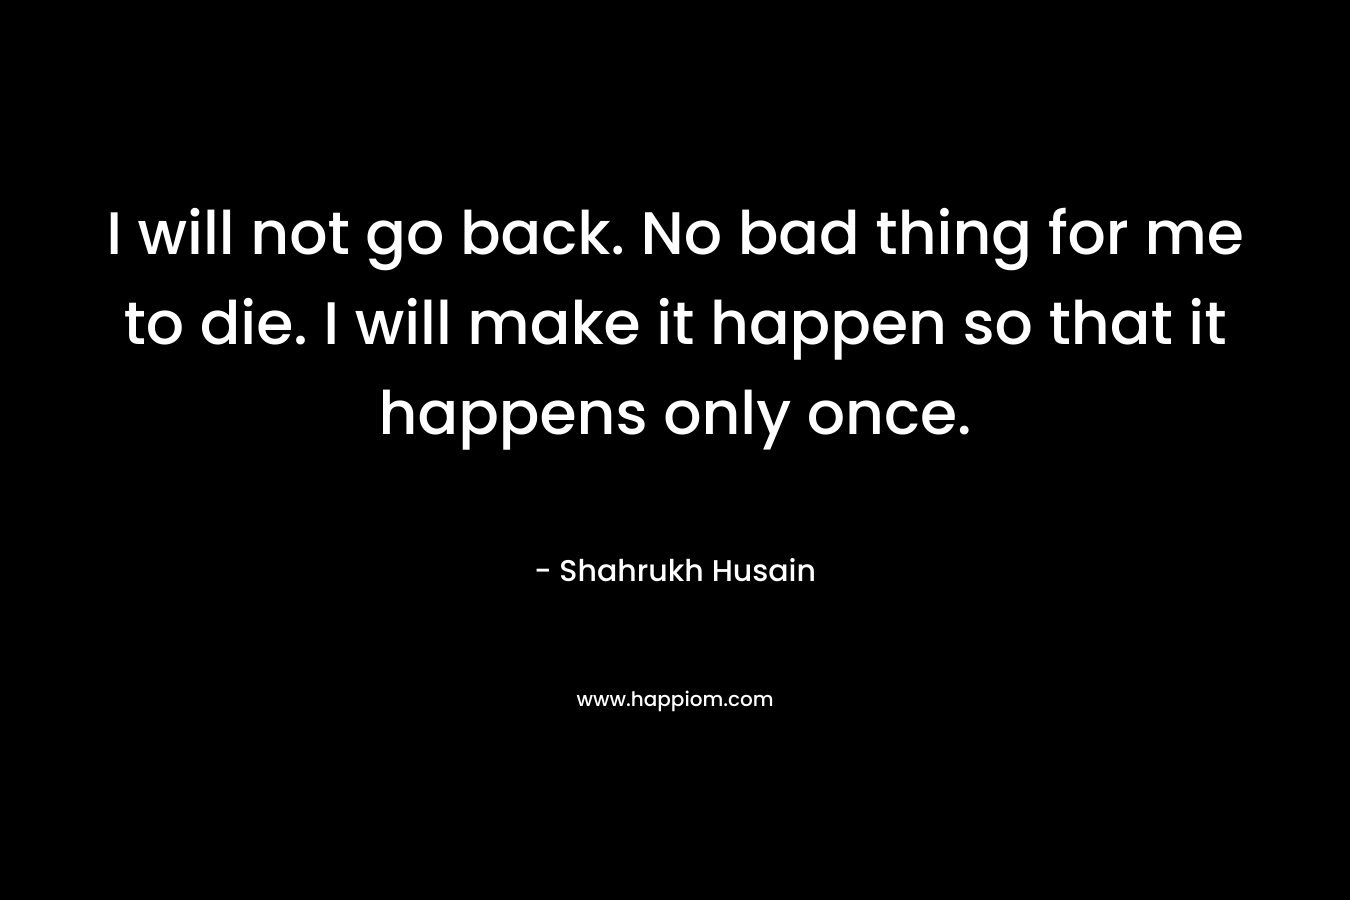 I will not go back. No bad thing for me to die. I will make it happen so that it happens only once. – Shahrukh Husain